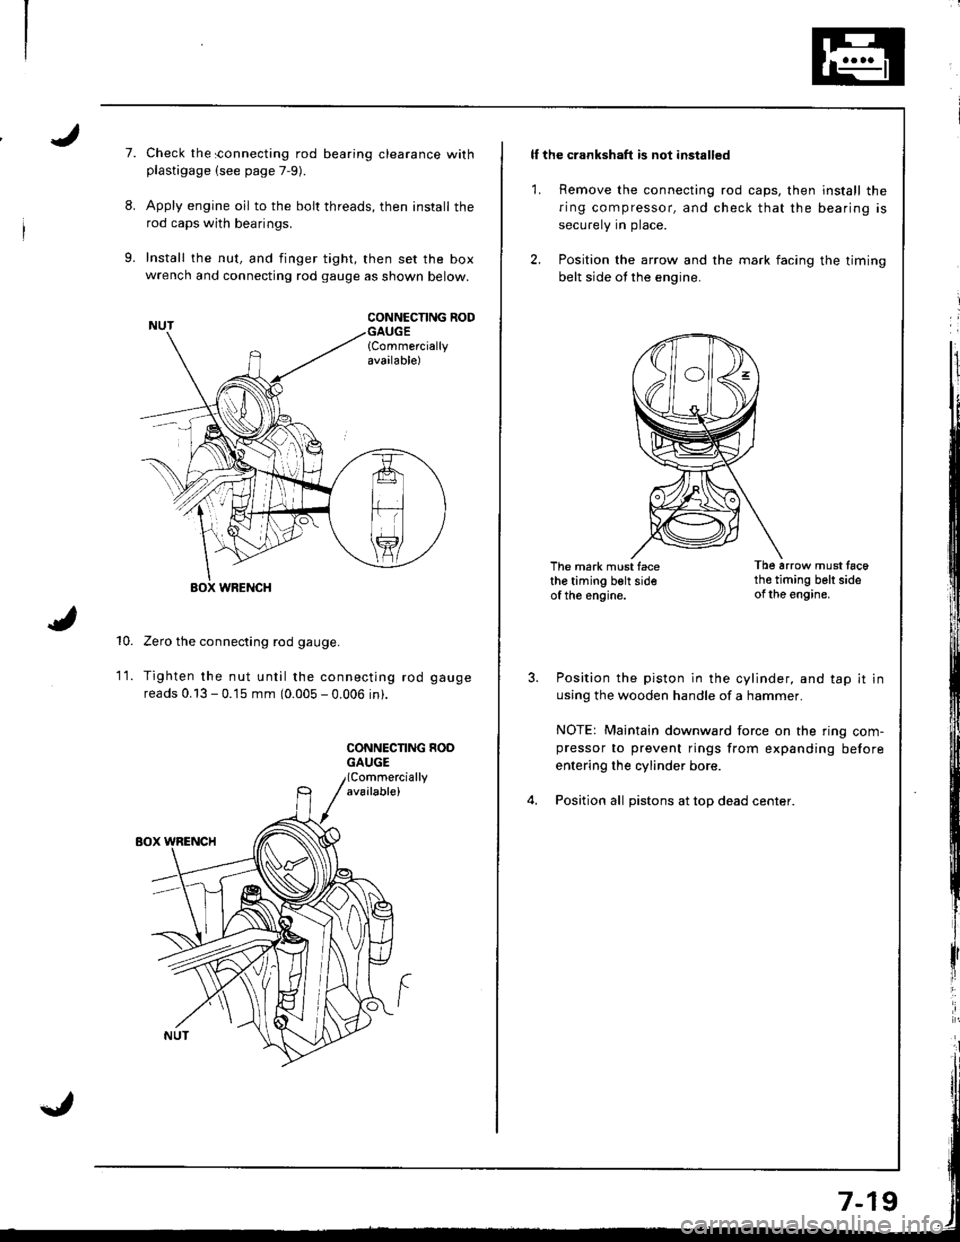 HONDA INTEGRA 1998 4.G User Guide I
7.
8.
9.
Check the sonnecting rod bearing clearance withplastigage (see page 7-9).
Apply engine oil to the bolt threads, then install the
rod caps with bearings.
Install the nut, and finger tight, t